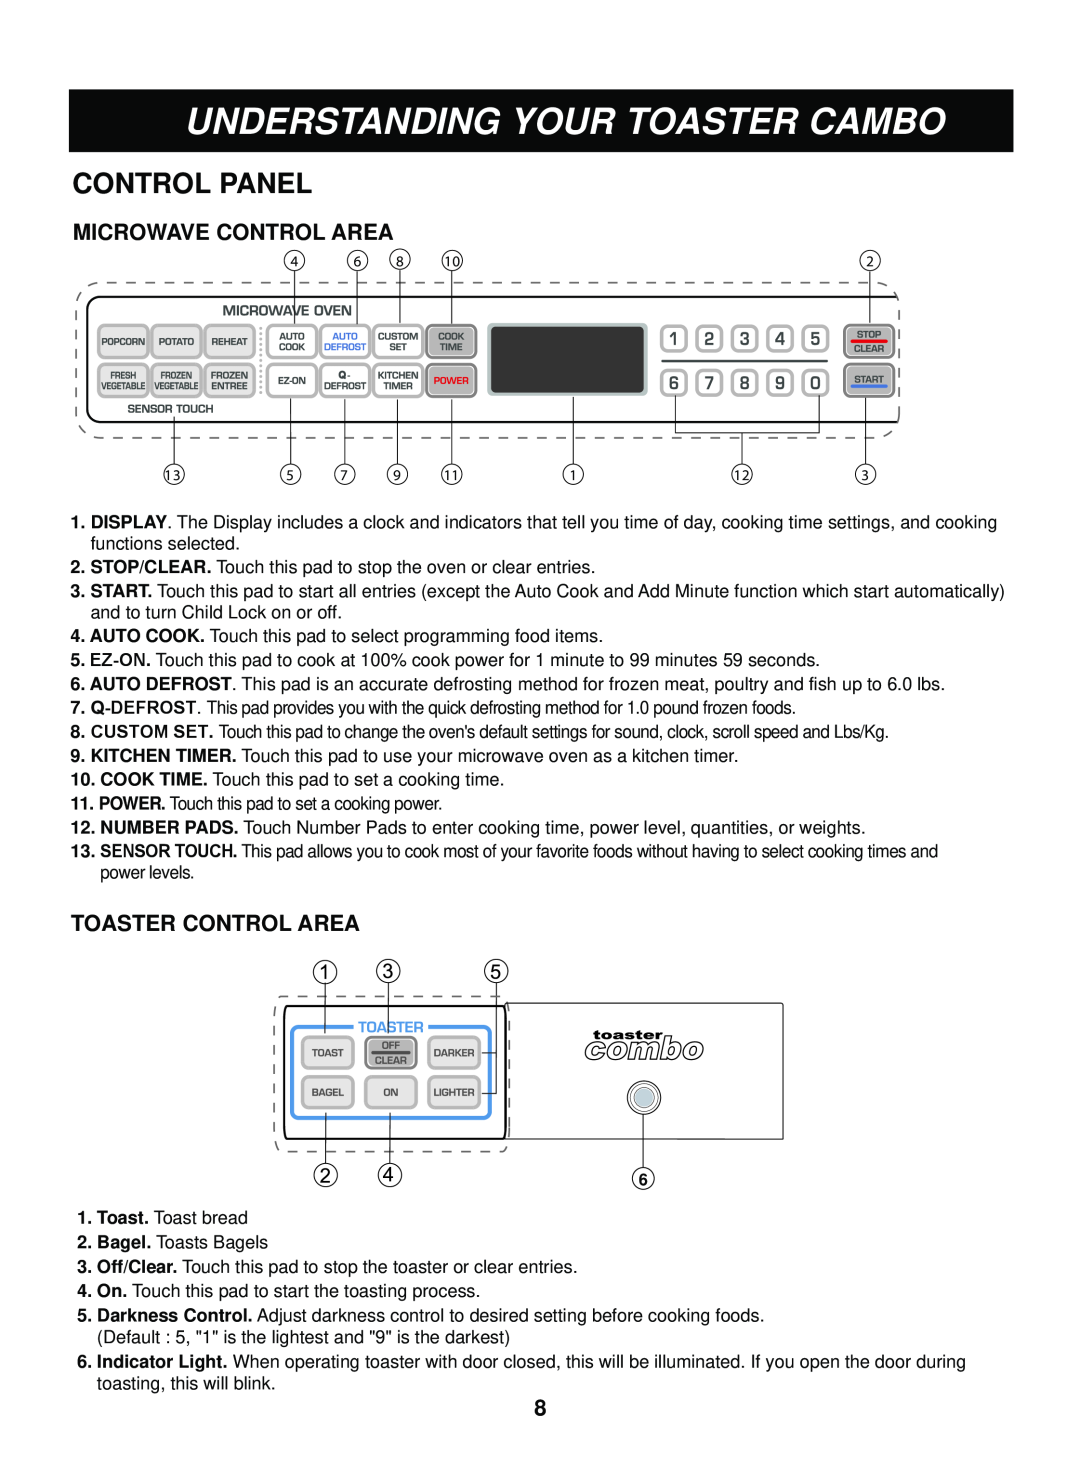 LG Electronics LTRM1240SW Control Panel, Microwave Control Area, Toaster Control Area, Understanding Your Toaster Cambo 